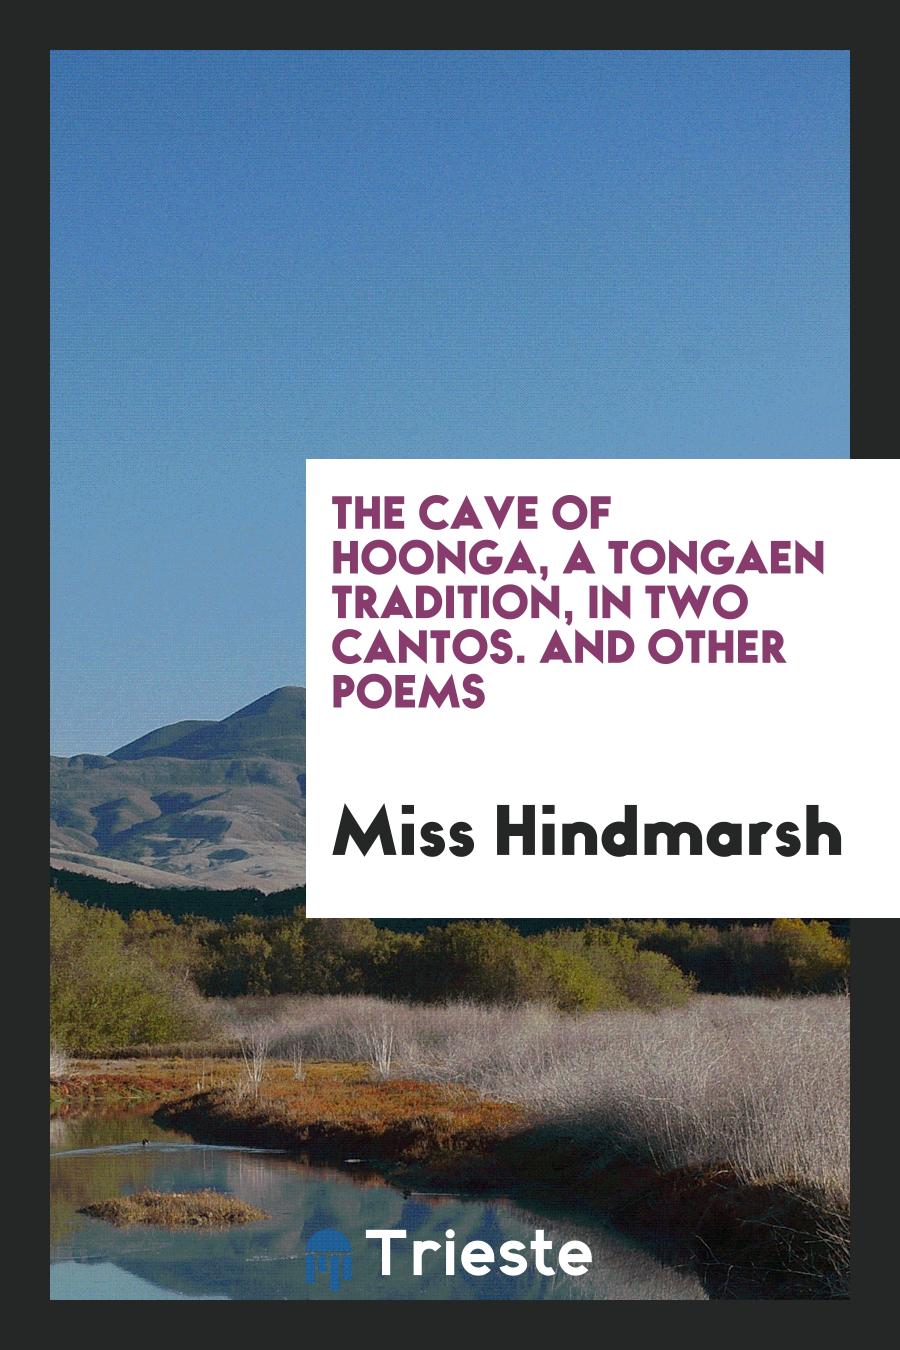 The cave of Hoonga, a Tongaen tradition, in two cantos. And other poems